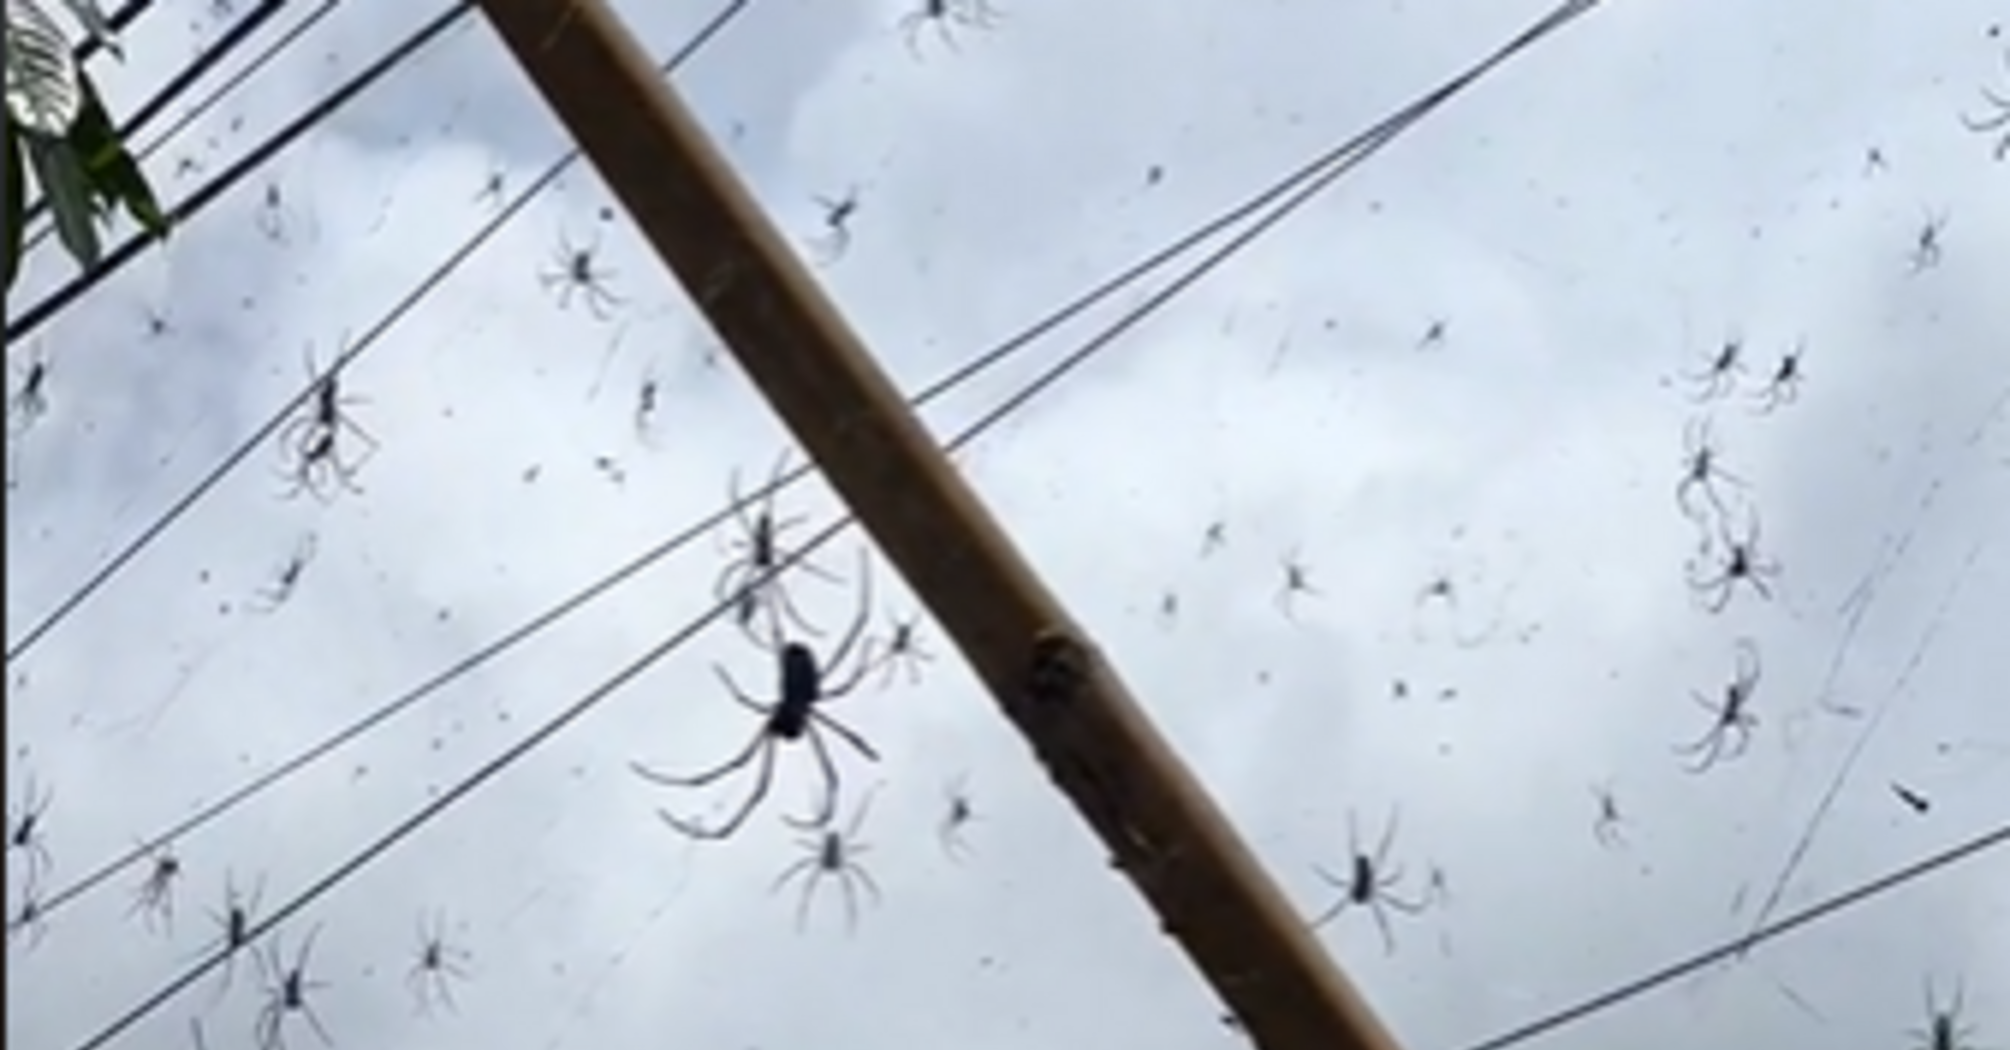 Tourist shows the invasion of huge spiders in Bali